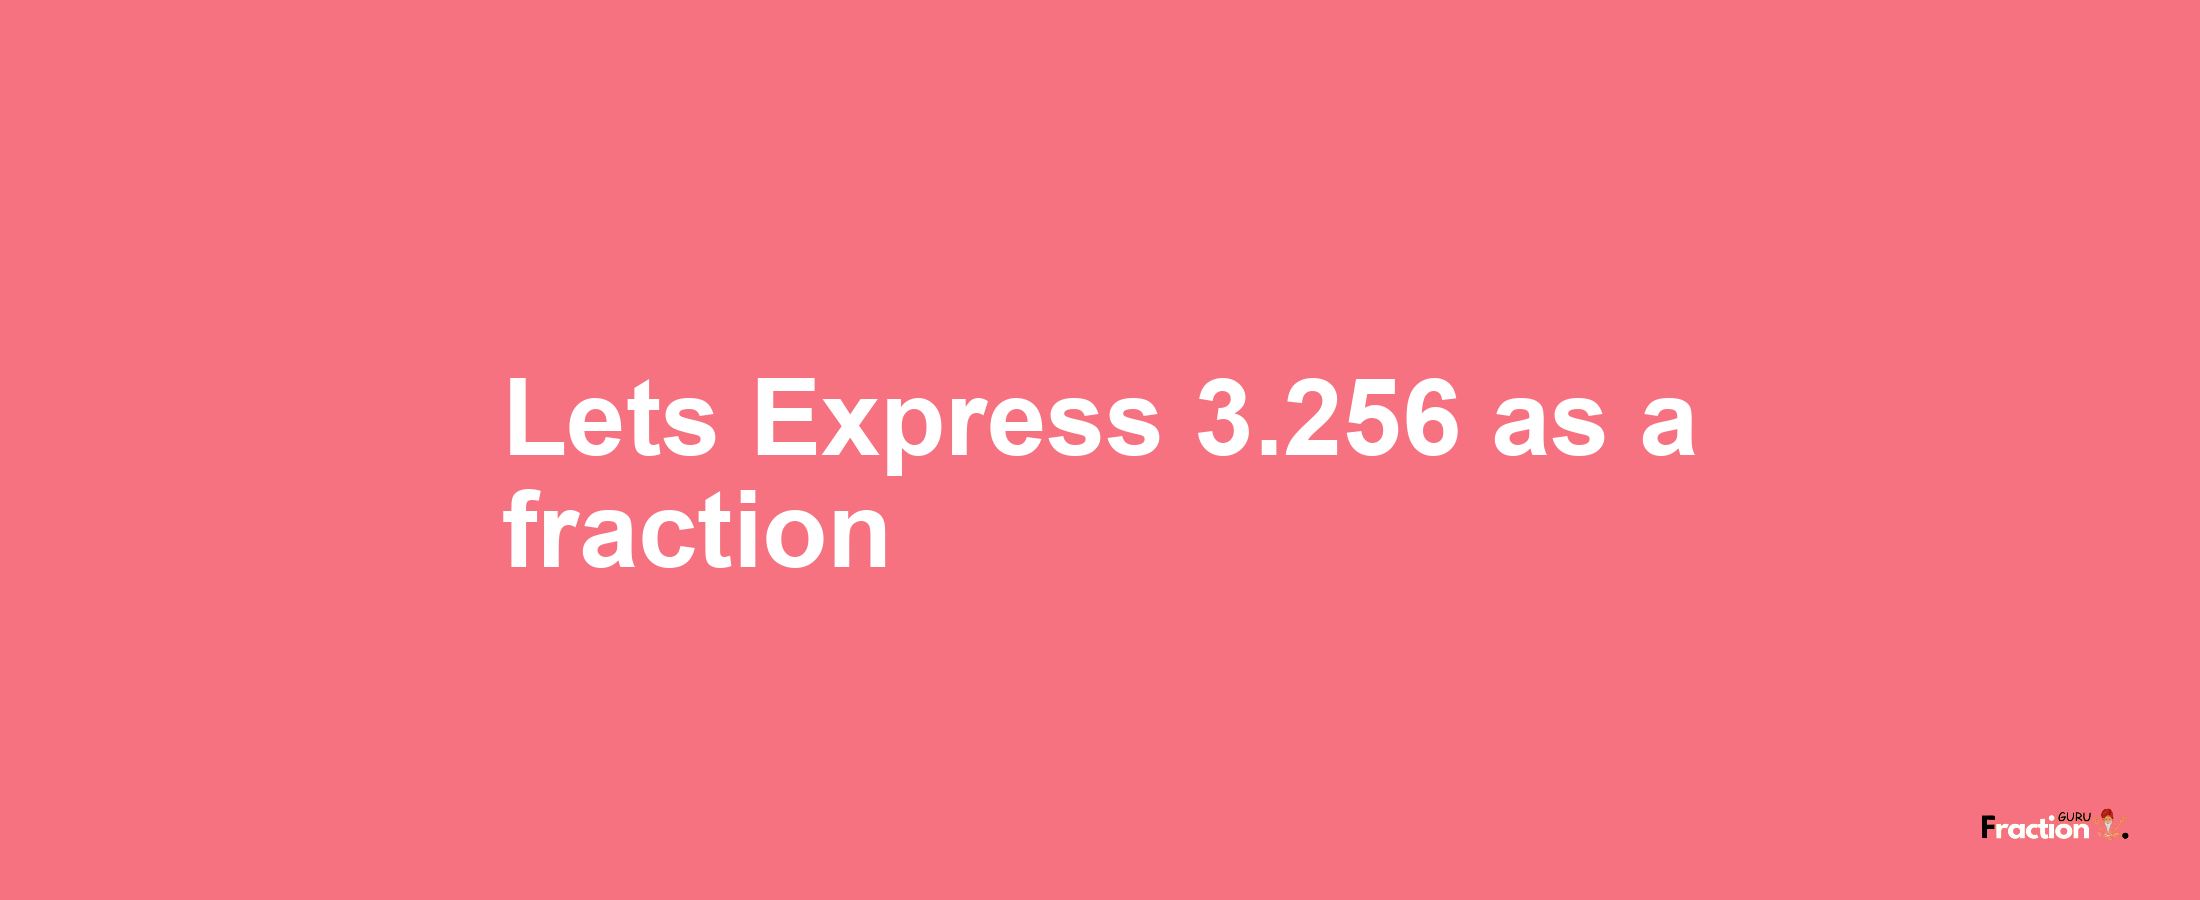 Lets Express 3.256 as afraction